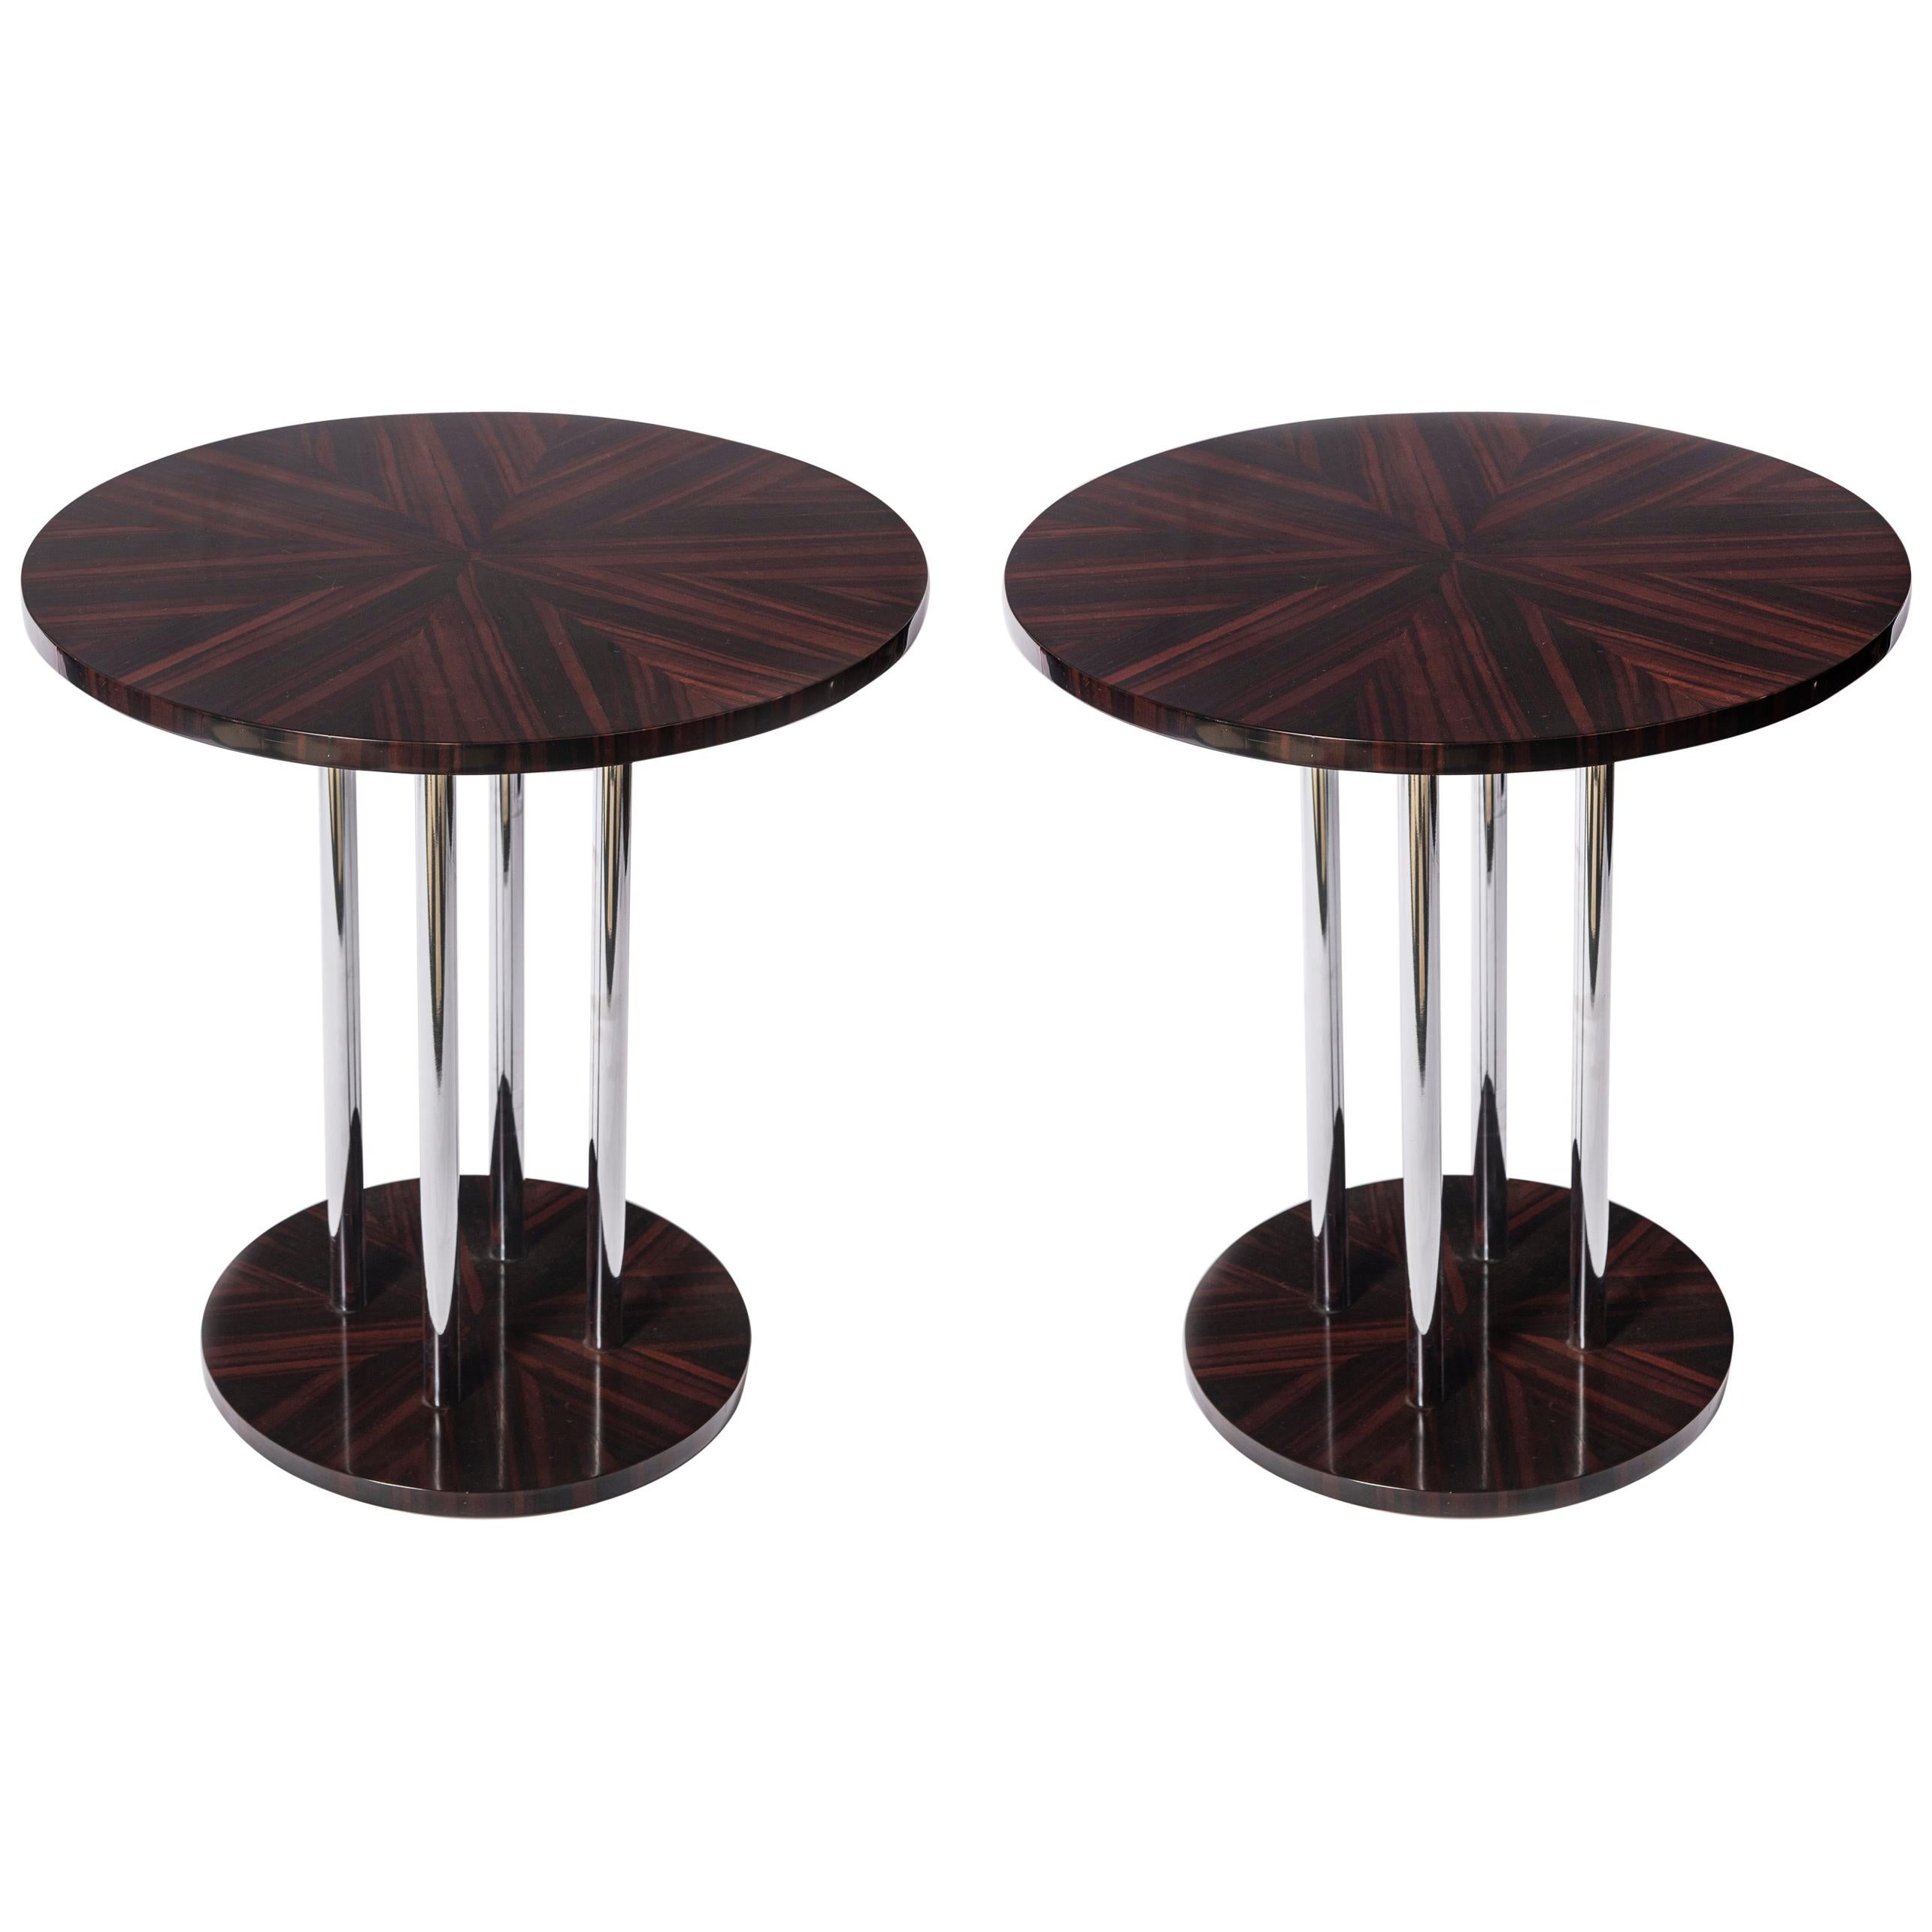 Pair of Wood and Chrome Metal Side Tables, Art Deco Period, France, circa 1940